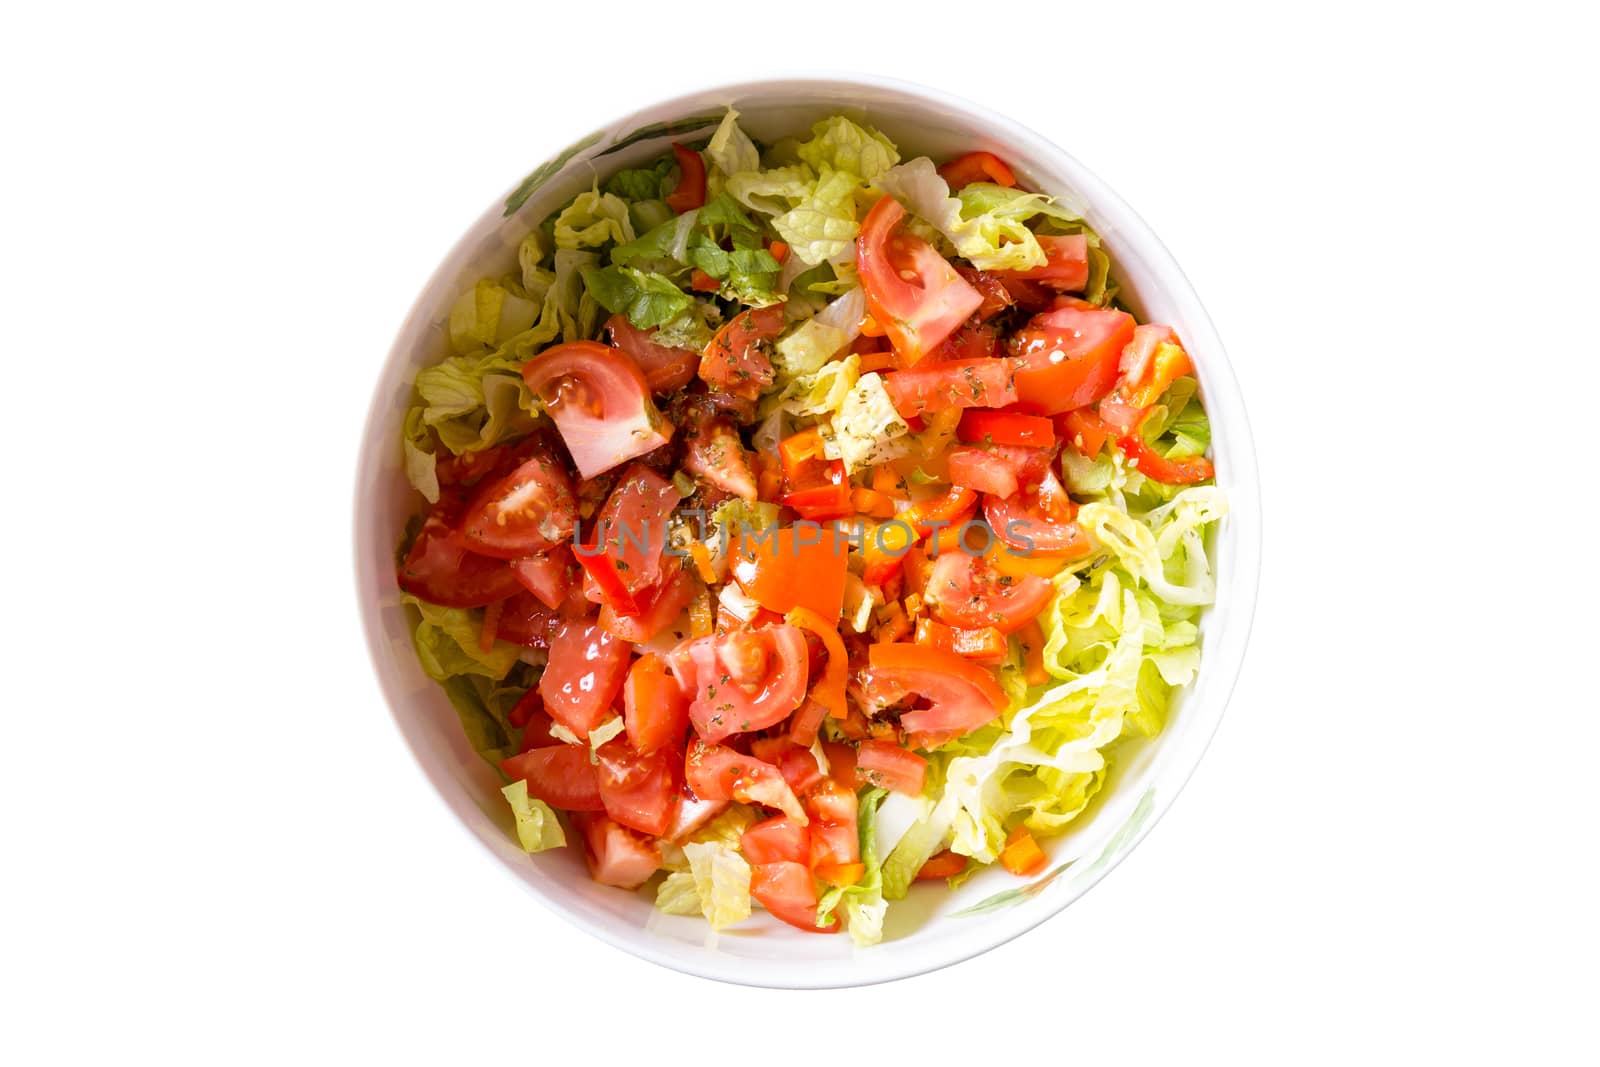 Gourmet Fresh Healthy Tomato and Cabbage Salad by coskun